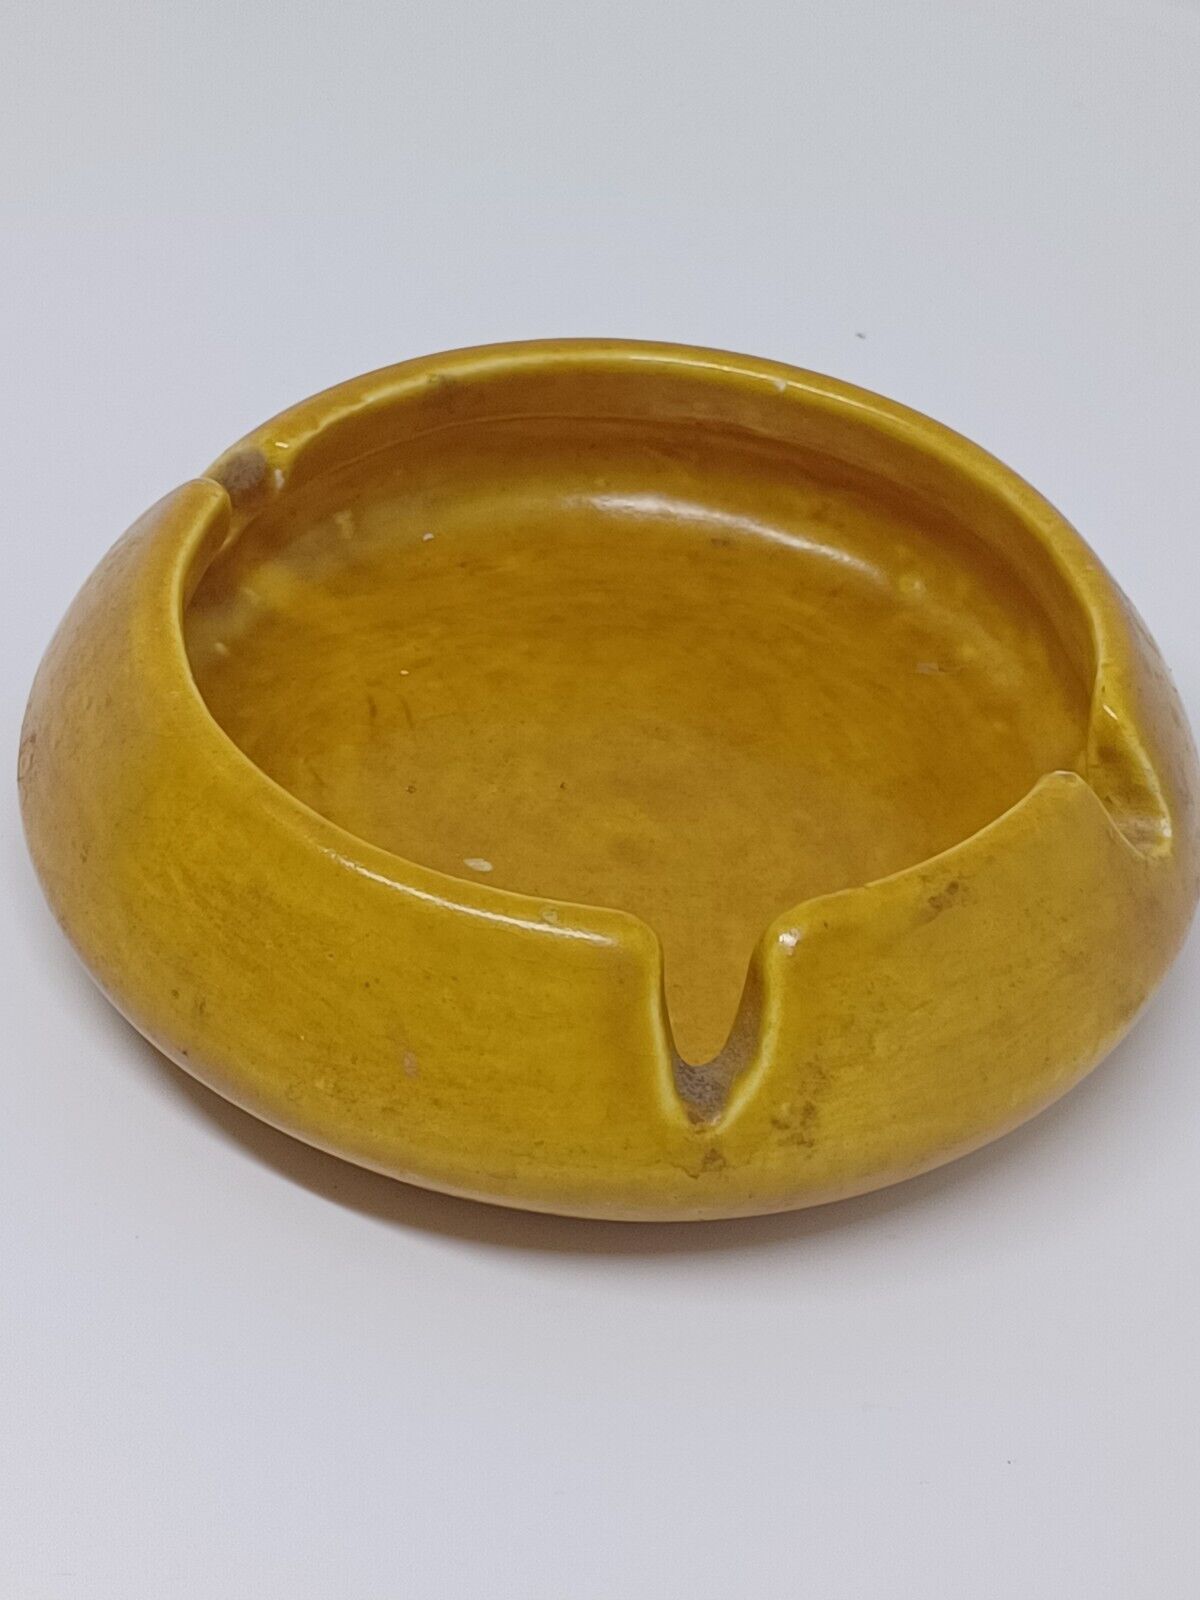 Classic 1973 MCM Ashtray Homemade Solid Yellow with personalized TT Unique